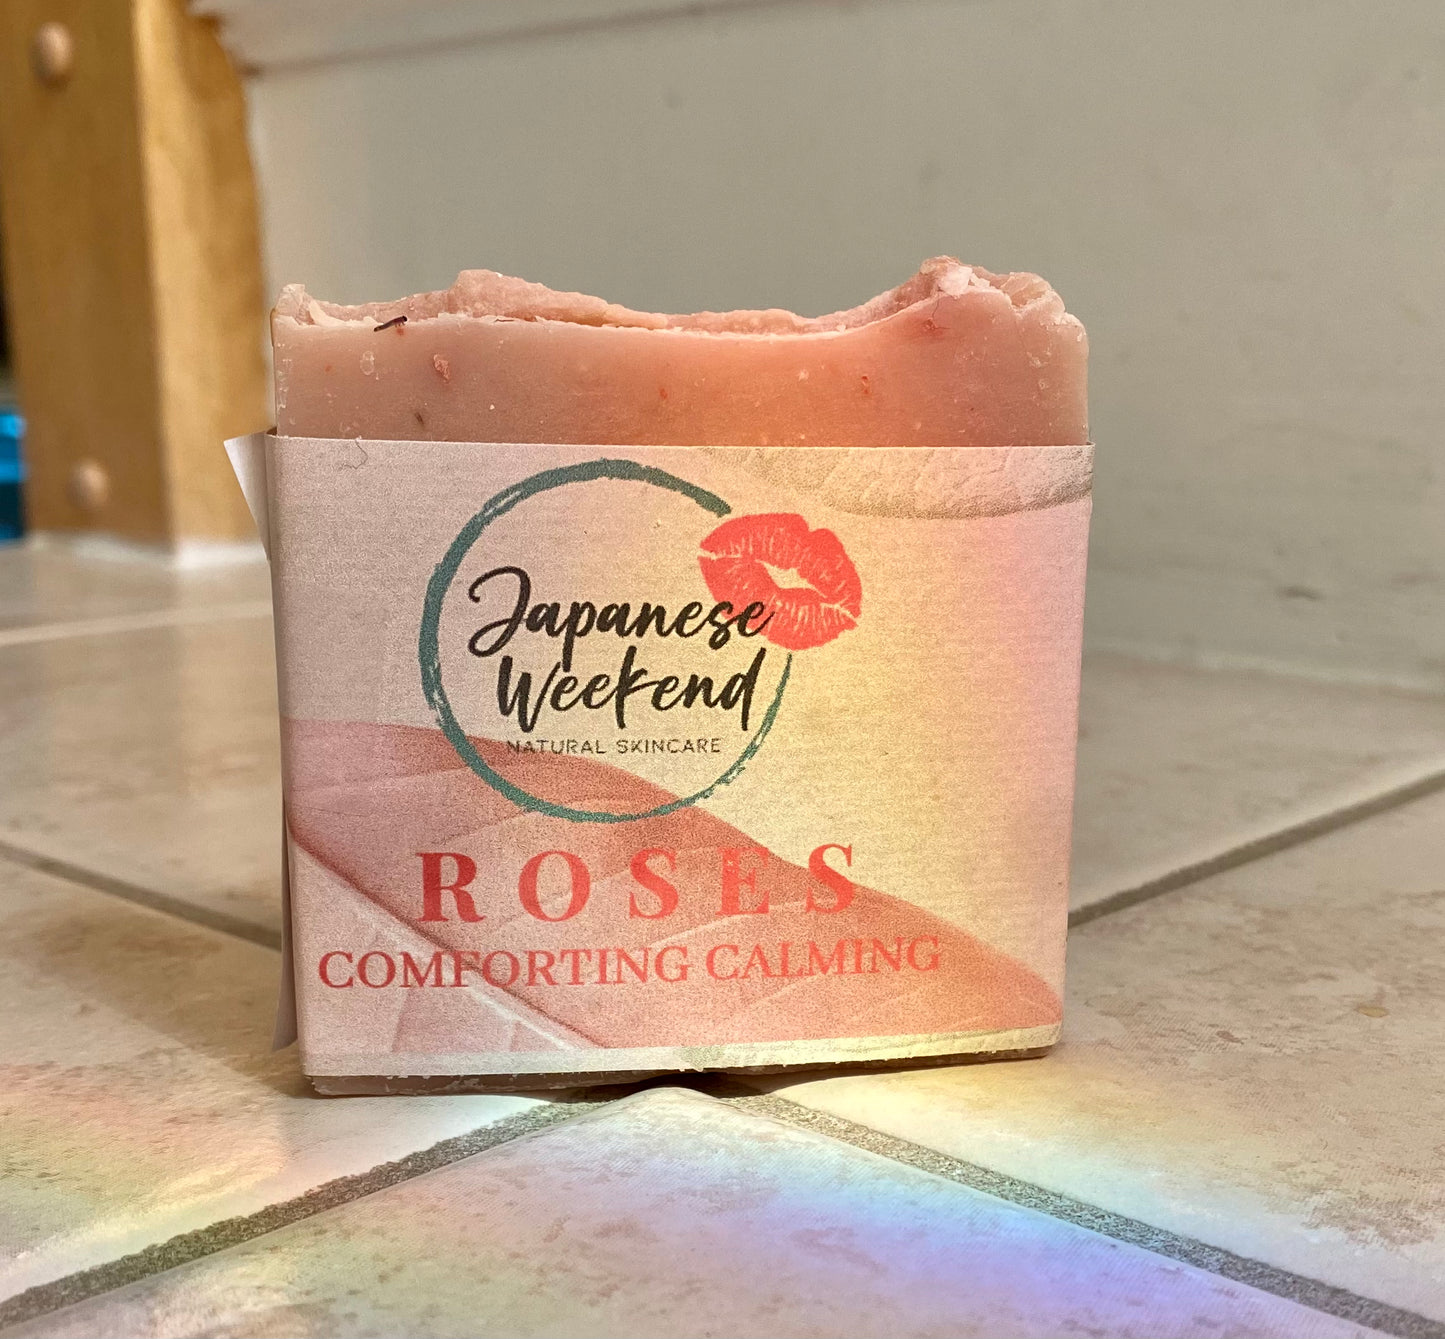 Roses (Comforting Calming) LIMITED EDITION Soap Bar